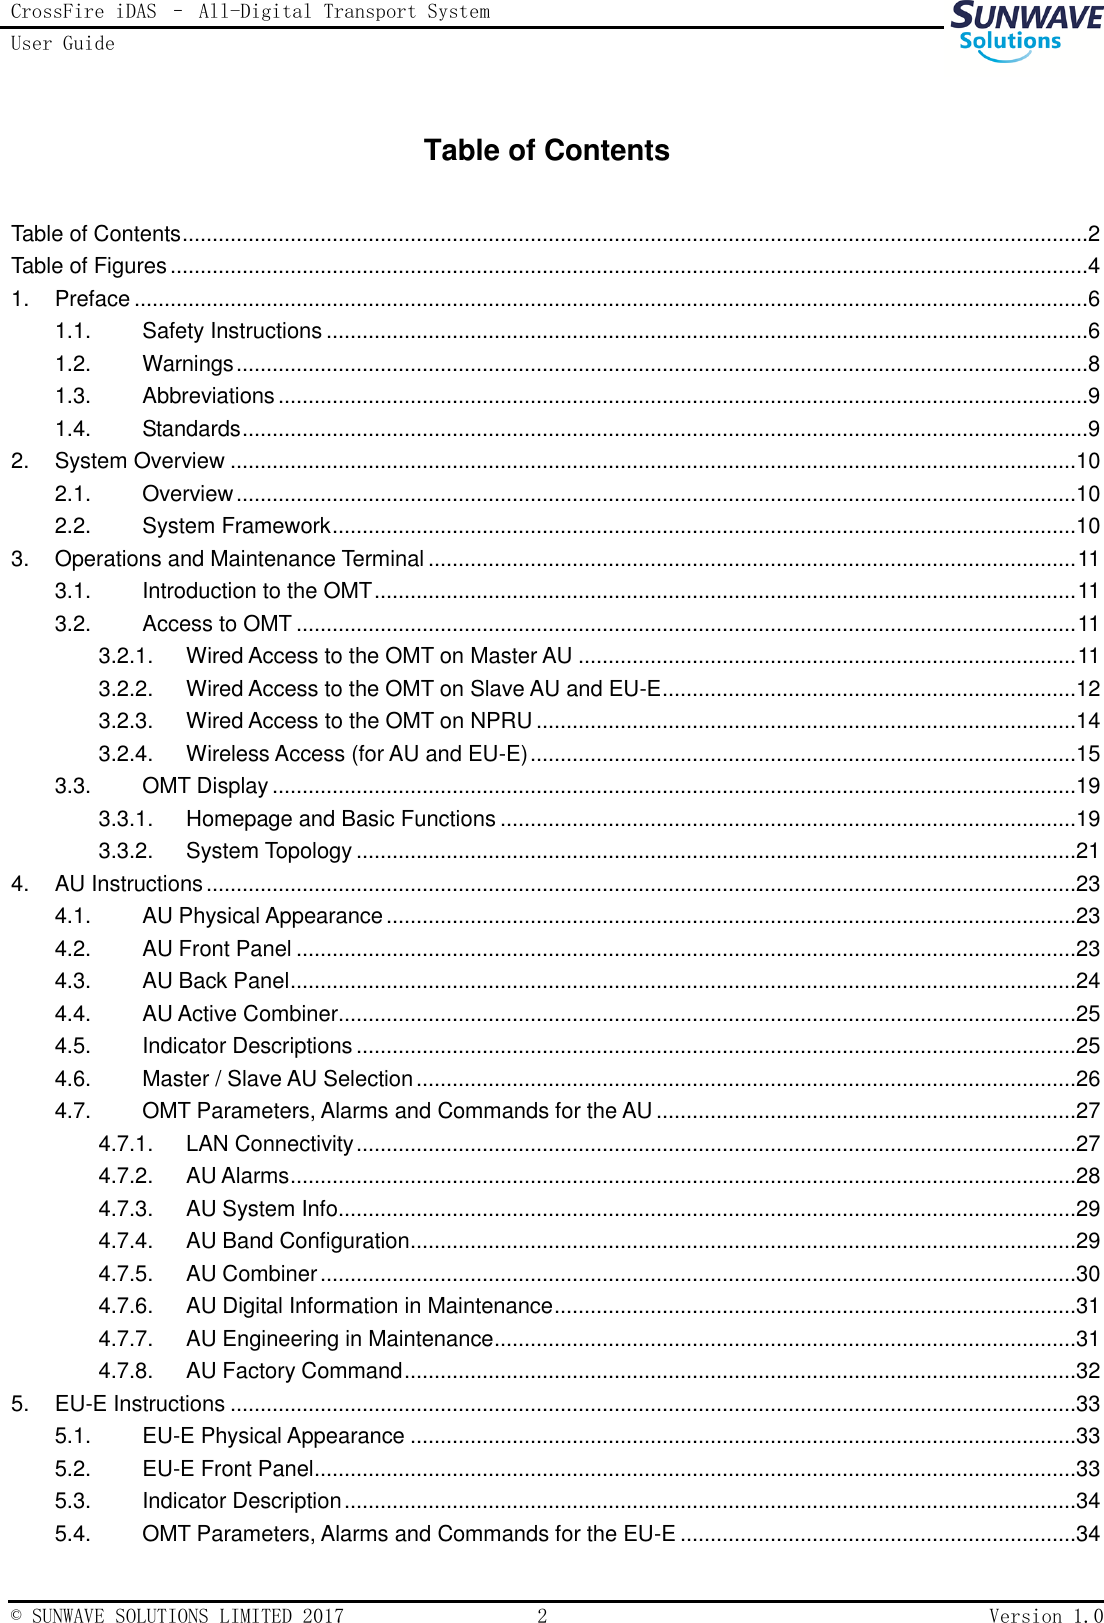 CrossFire iDAS – All-Digital Transport System User Guide   © SUNWAVE SOLUTIONS LIMITED 2017  2  Version 1.0  Table of Contents Table of Contents .......................................................................................................................................................2 Table of Figures .........................................................................................................................................................4 1.  Preface ...............................................................................................................................................................6 1.1.  Safety Instructions ...............................................................................................................................6 1.2.  Warnings ..............................................................................................................................................8 1.3.  Abbreviations .......................................................................................................................................9 1.4.  Standards .............................................................................................................................................9 2.  System Overview .............................................................................................................................................10 2.1.  Overview ............................................................................................................................................10 2.2.  System Framework ............................................................................................................................10 3.  Operations and Maintenance Terminal ............................................................................................................ 11 3.1.  Introduction to the OMT ..................................................................................................................... 11 3.2.  Access to OMT .................................................................................................................................. 11 3.2.1.  Wired Access to the OMT on Master AU ................................................................................... 11 3.2.2.  Wired Access to the OMT on Slave AU and EU-E .....................................................................12 3.2.3.  Wired Access to the OMT on NPRU ..........................................................................................14 3.2.4.  Wireless Access (for AU and EU-E) ...........................................................................................15 3.3.  OMT Display ......................................................................................................................................19 3.3.1.  Homepage and Basic Functions ................................................................................................19 3.3.2.  System Topology ........................................................................................................................21 4.  AU Instructions .................................................................................................................................................23 4.1.  AU Physical Appearance ...................................................................................................................23 4.2.  AU Front Panel ..................................................................................................................................23 4.3.  AU Back Panel ...................................................................................................................................24 4.4.  AU Active Combiner...........................................................................................................................25 4.5.  Indicator Descriptions ........................................................................................................................25 4.6.  Master / Slave AU Selection ..............................................................................................................26 4.7.  OMT Parameters, Alarms and Commands for the AU ......................................................................27 4.7.1.  LAN Connectivity ........................................................................................................................27 4.7.2.  AU Alarms ...................................................................................................................................28 4.7.3.  AU System Info...........................................................................................................................29 4.7.4.  AU Band Configuration ...............................................................................................................29 4.7.5.  AU Combiner ..............................................................................................................................30 4.7.6.  AU Digital Information in Maintenance .......................................................................................31 4.7.7.  AU Engineering in Maintenance .................................................................................................31 4.7.8.  AU Factory Command ................................................................................................................32 5. EU-E Instructions .............................................................................................................................................33 5.1.  EU-E Physical Appearance ...............................................................................................................33 5.2.  EU-E Front Panel ...............................................................................................................................33 5.3.  Indicator Description ..........................................................................................................................34 5.4.  OMT Parameters, Alarms and Commands for the EU-E ..................................................................34 